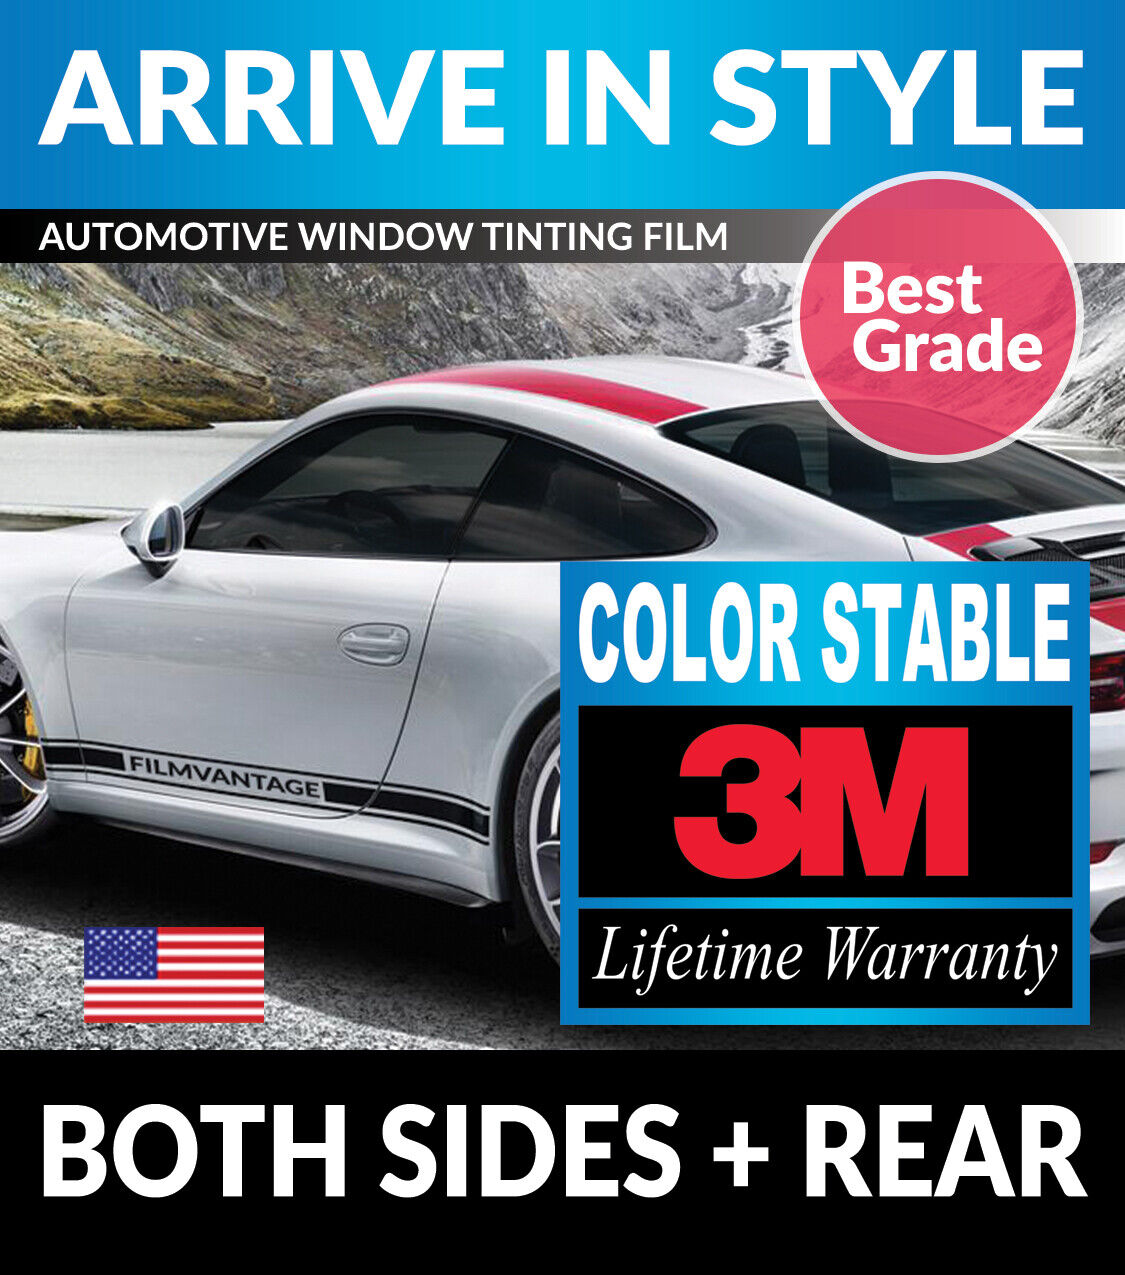 PRECUT WINDOW TINT W/ 3M COLOR STABLE FOR MERCEDES BENZ SL320 94-97